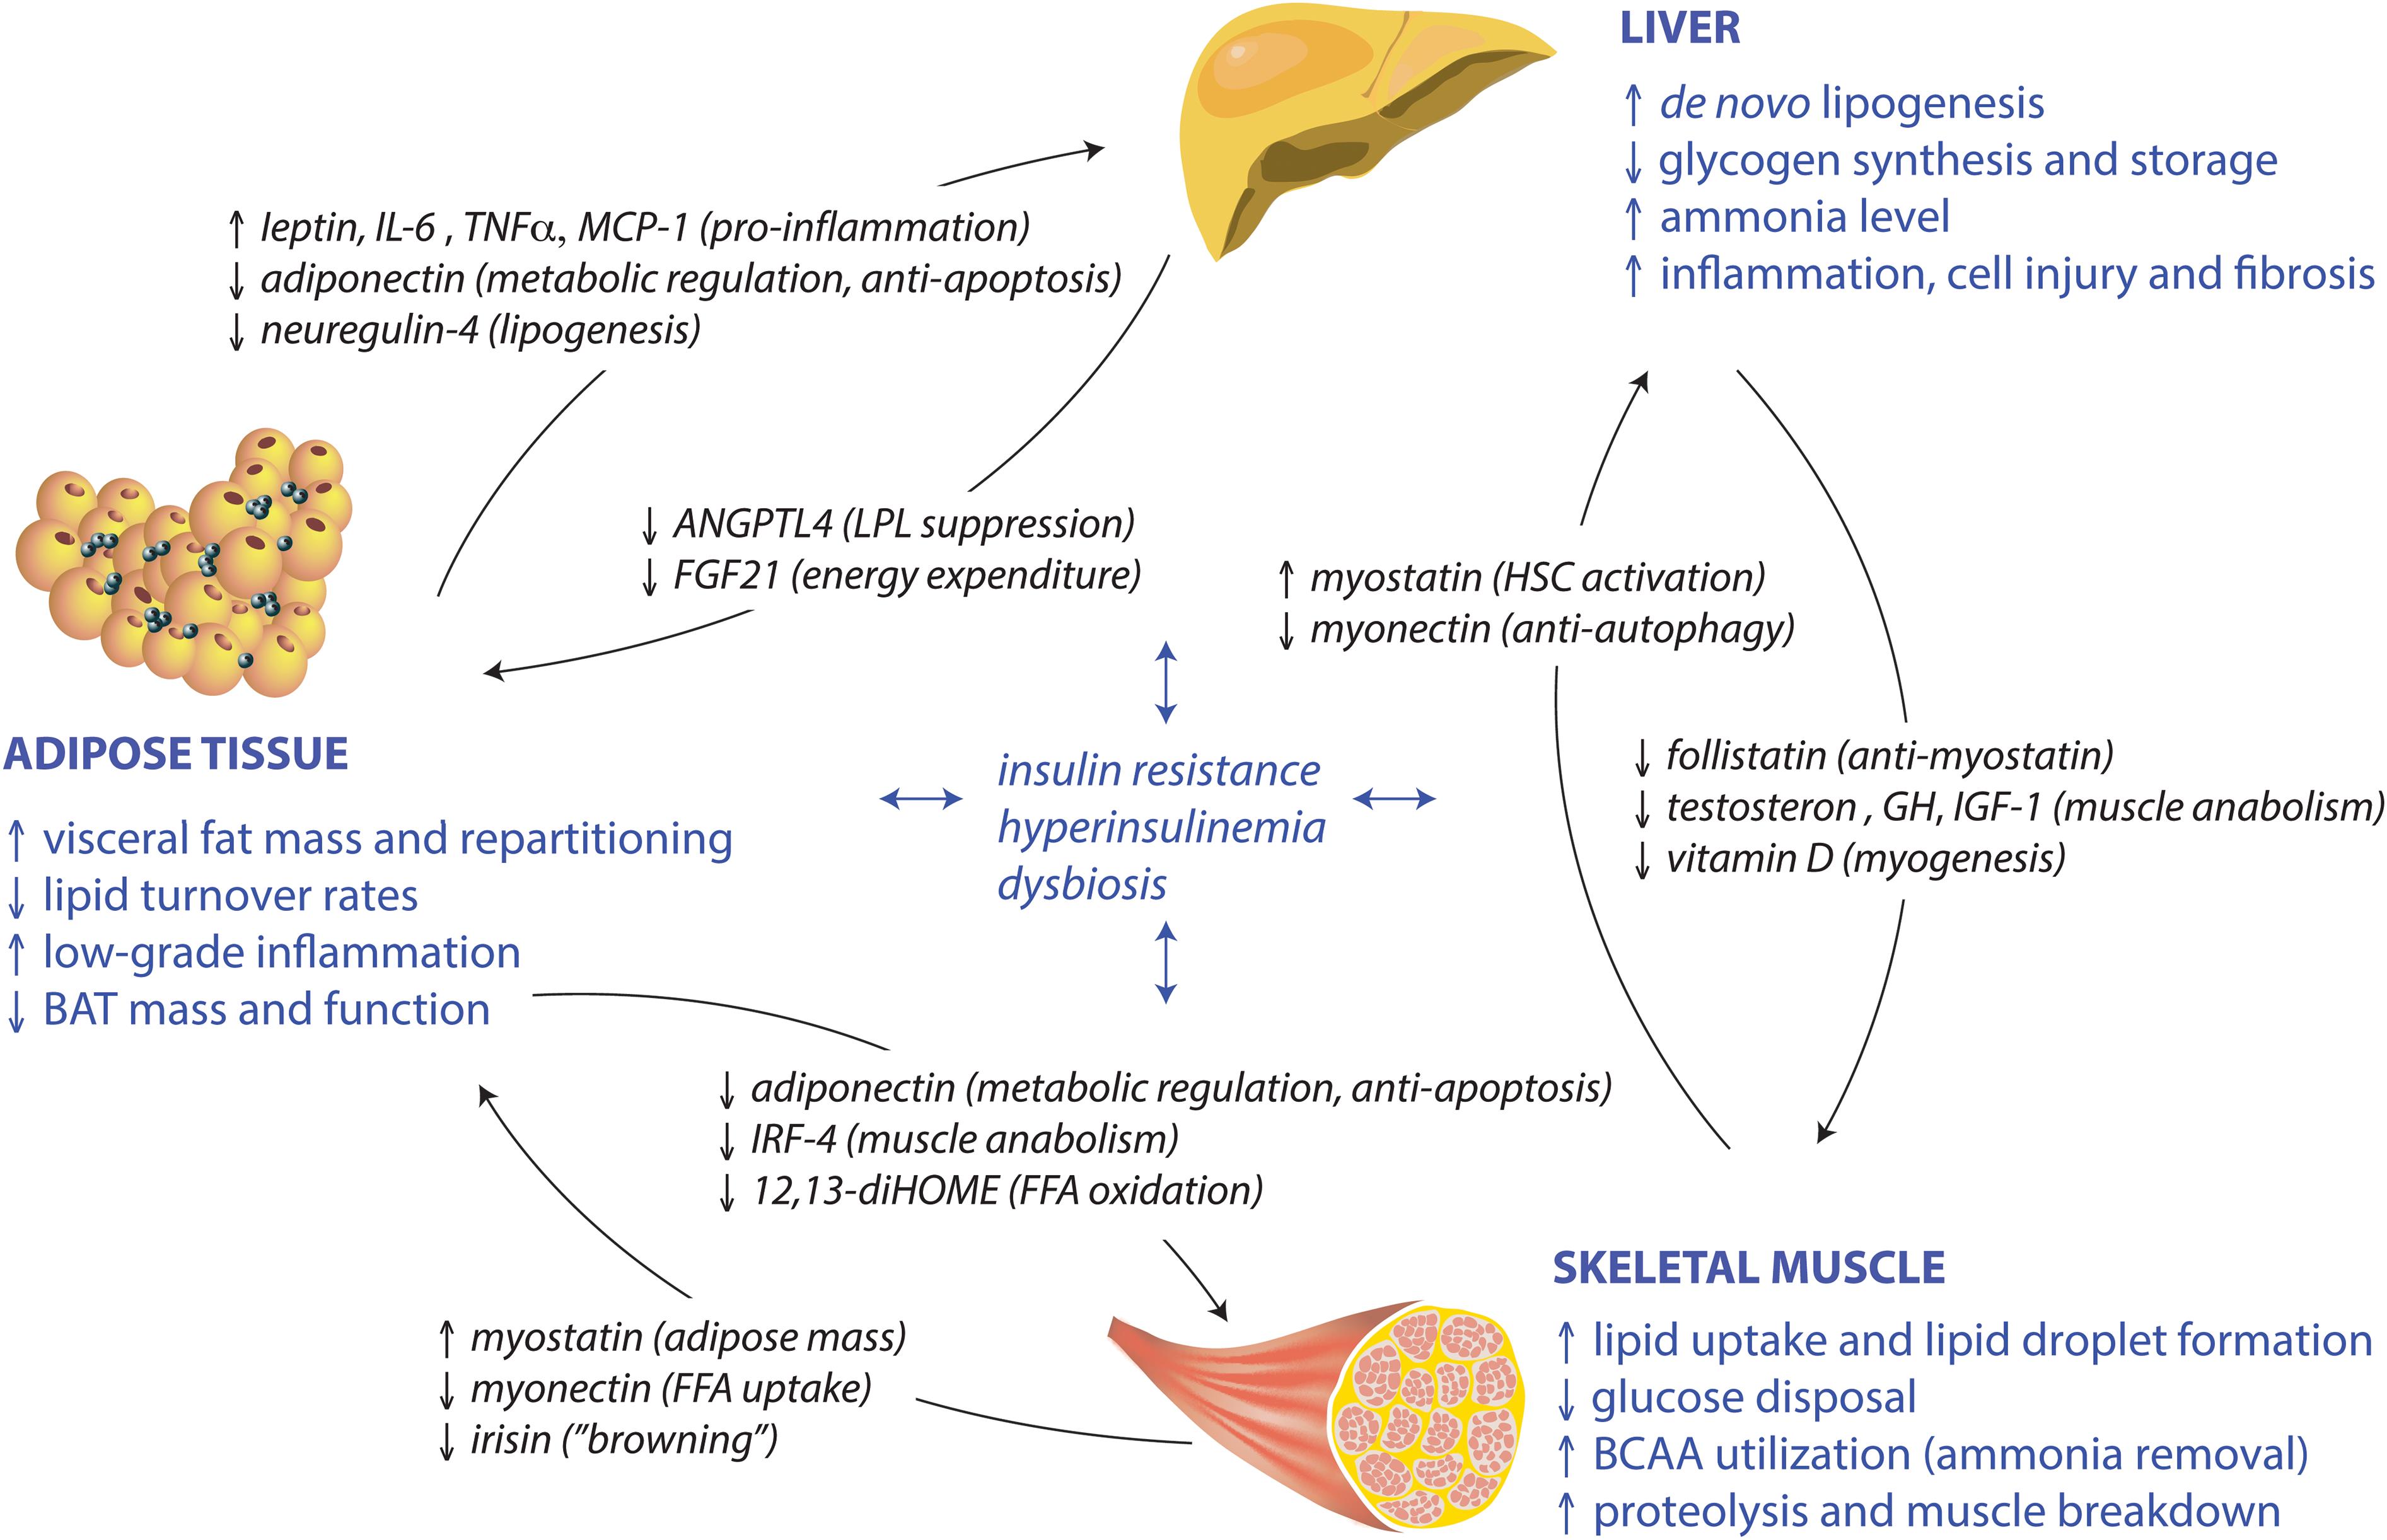 <bold>Adipose–muscle–liver crosstalk in NAFLD: Mechanisms and mediators of pathogenesis.</bold> Schematic depiction of major structural and functional changes in adipose tissue, skeletal muscle, and the liver (blue) due to sustained energy surplus with key molecular mediators and mechanisms of interplay (black arrows). Input from other body components, such as pancreatic beta cells (hyperinsulinemia due to insulin resistance) and gut microbiota (dysbiosis), may affect all elements of the adipose–muscle–liver triangle (blue arrows). See details in the main text.